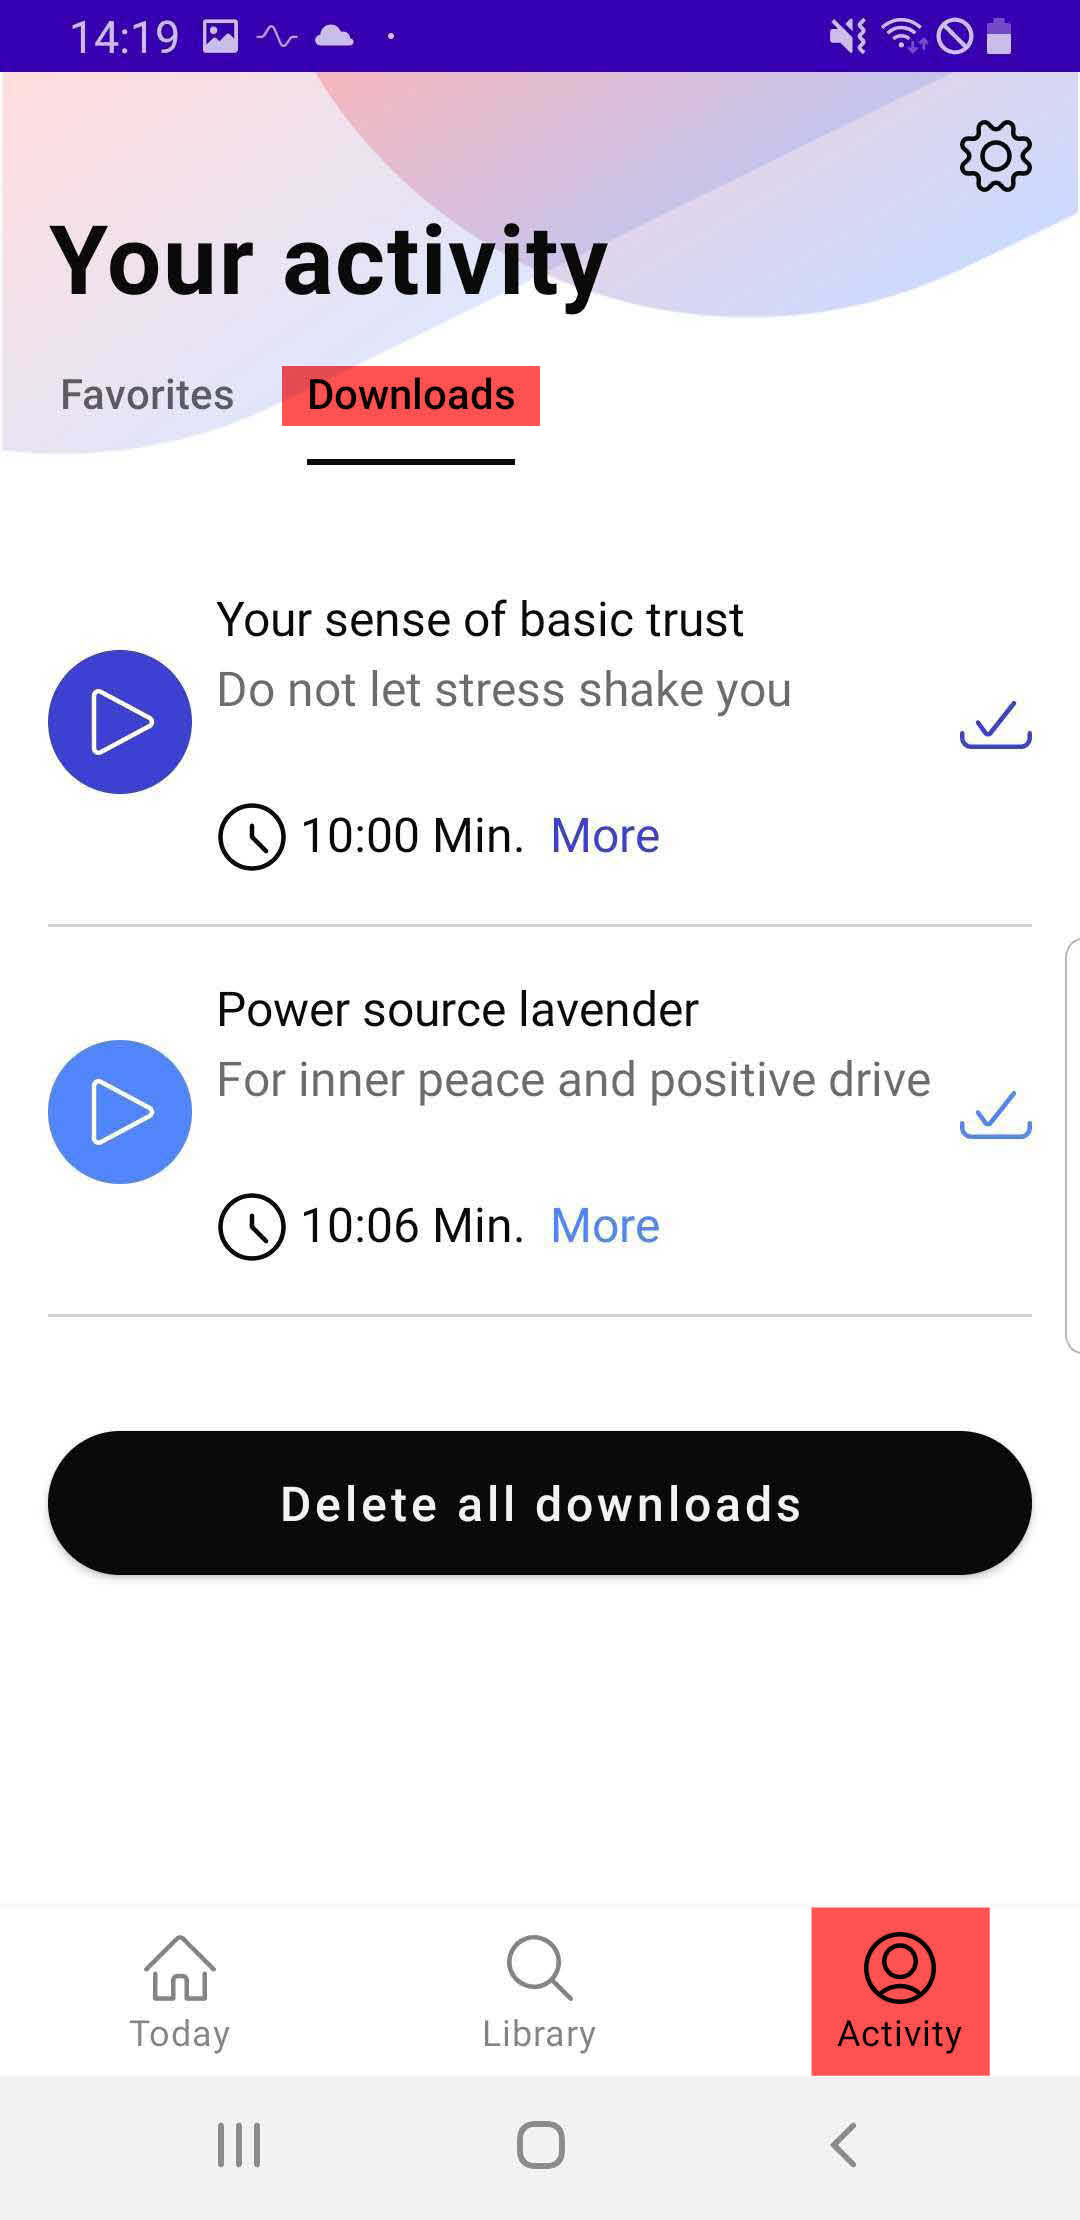 You can find downloaded meditations under activity